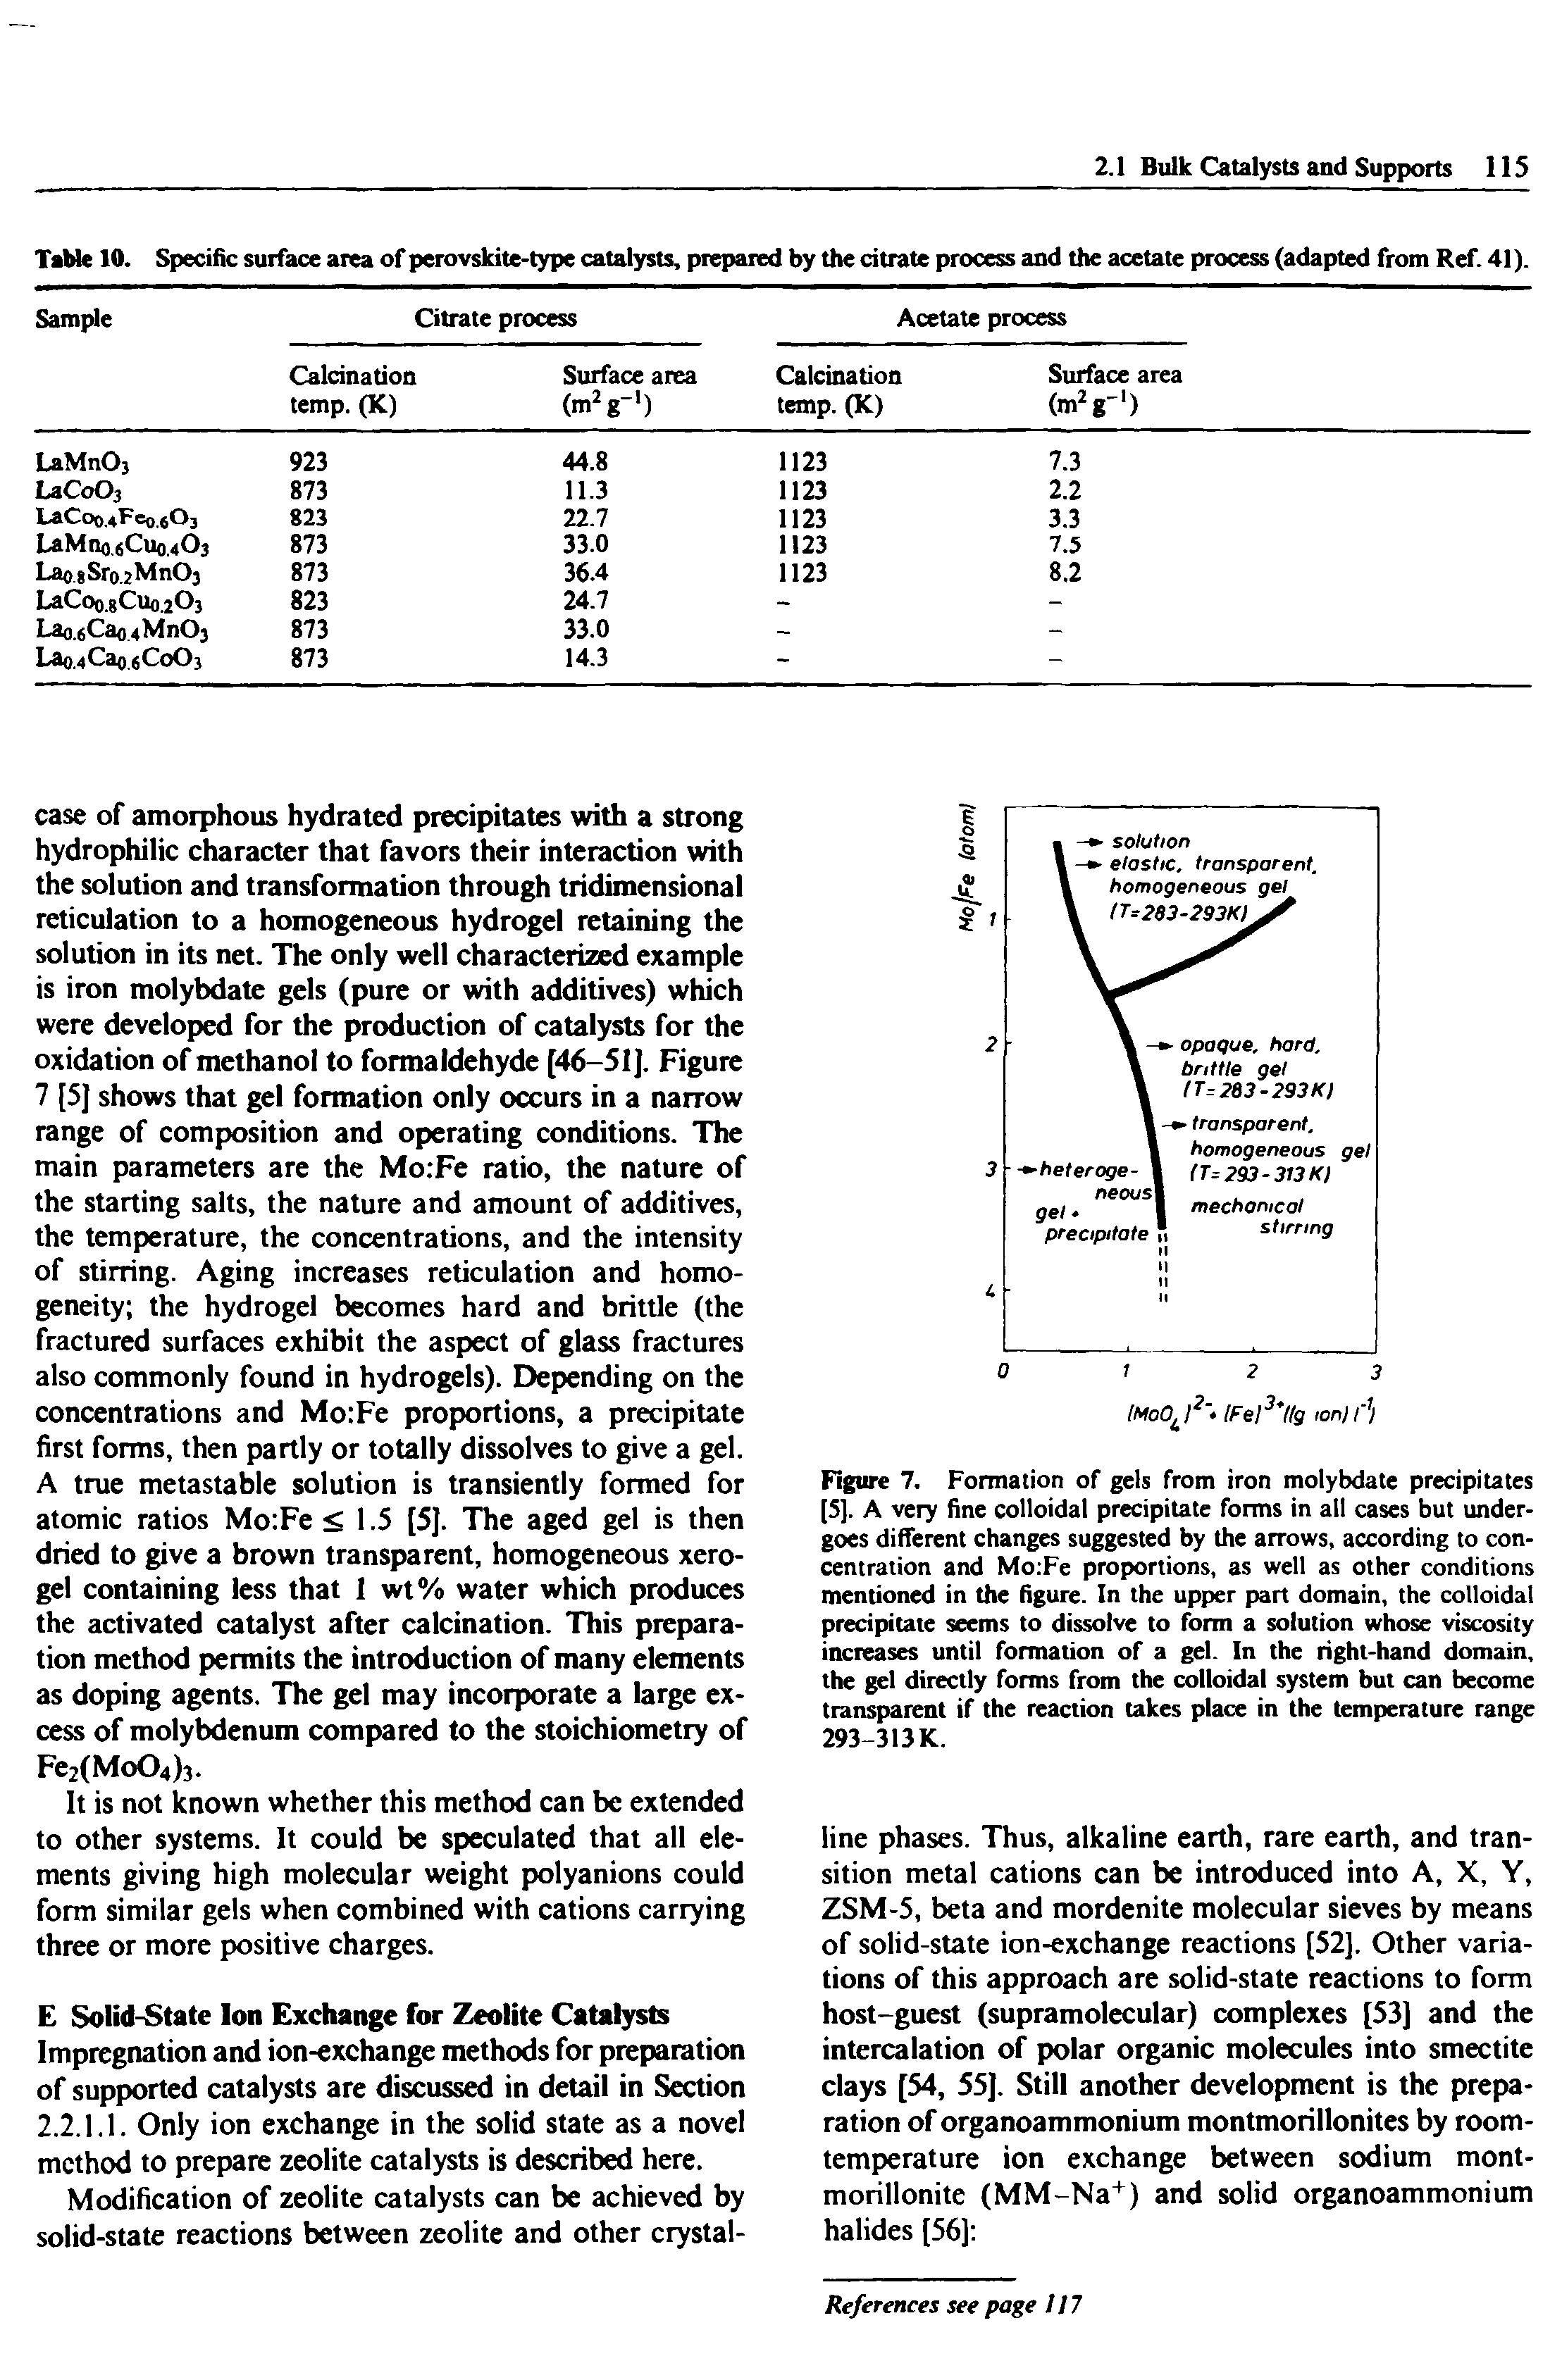 Figure 7. Formation of gels from iron molybdate precipitates [5]. A very fine colloidal precipitate forms in all cases but undergoes different changes suggested by the arrows, according to concentration and Mo Fe proportions, as well as other conditions mentioned in the figure. In the upper part domain, the colloidal precipitate seems to dissolve to form a solution whose viscosity increases until formation of a gel. In the right-hand domain, the gel directly forms from the colloidal system but can become transparent if the reaction takes place in the temperature range 293-313K.